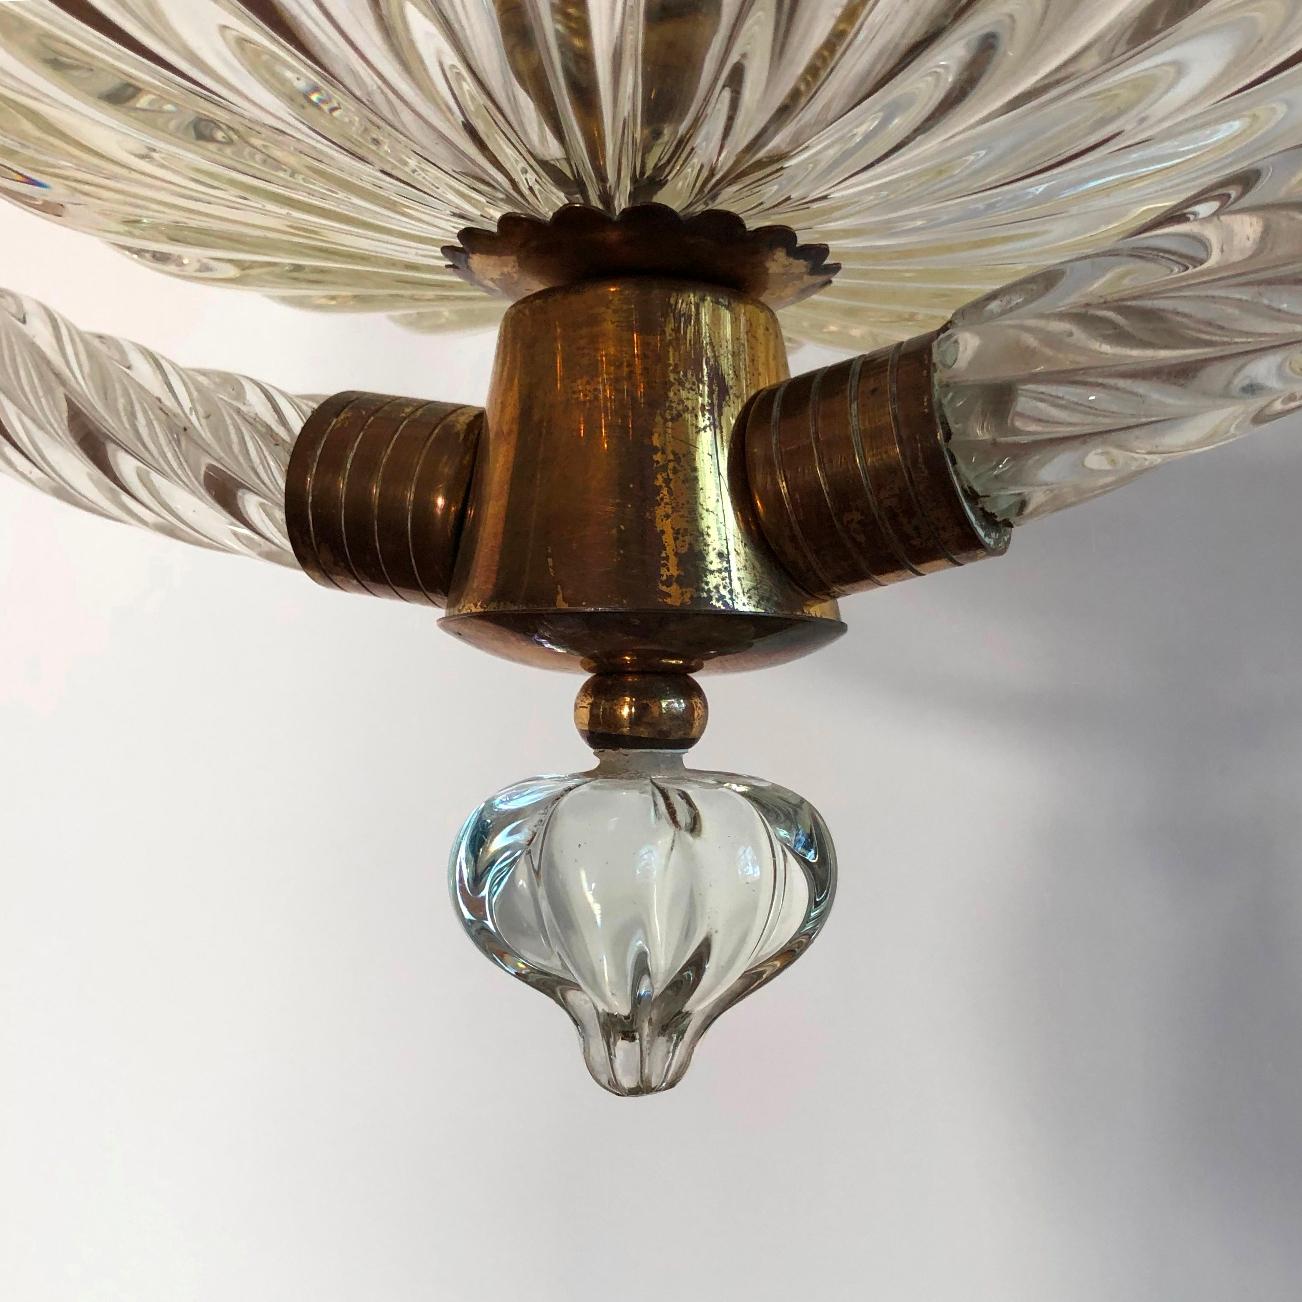 Ercole Barovier Murano Chandelier, Italy, 1940s For Sale 4